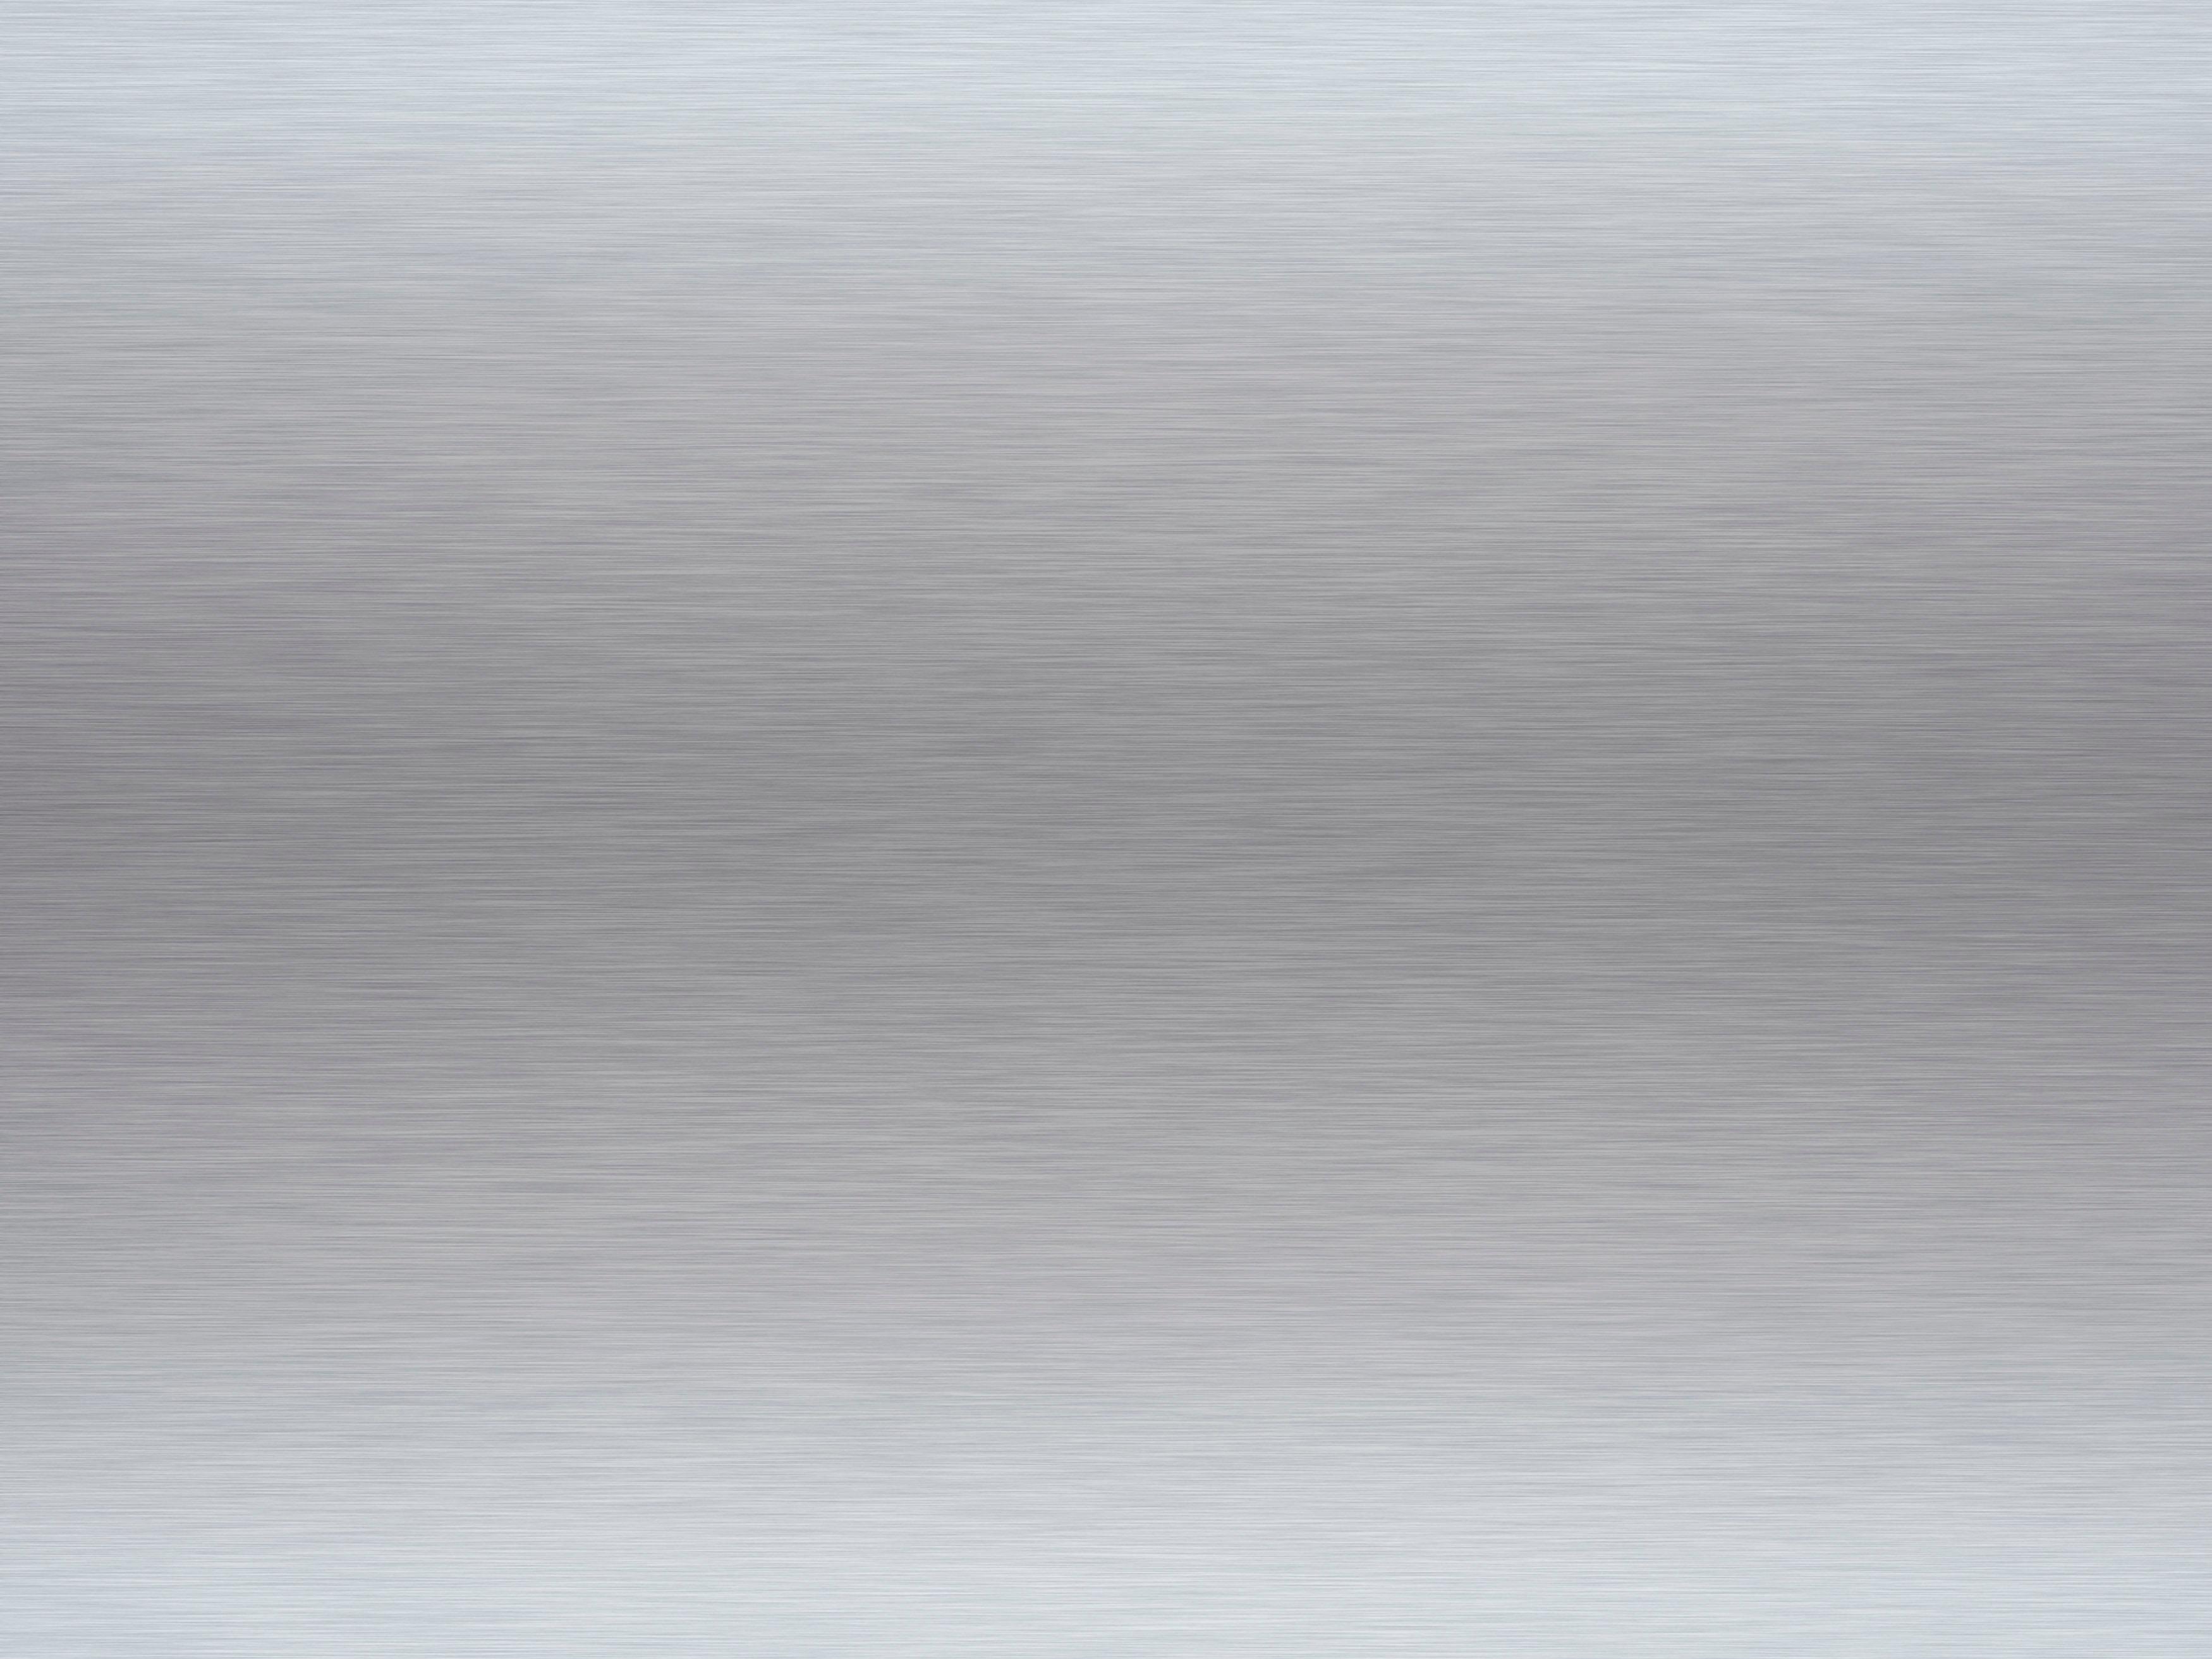 Brushed Silver Background - High Resolution Silver Color Background -  3500x2625 Wallpaper 